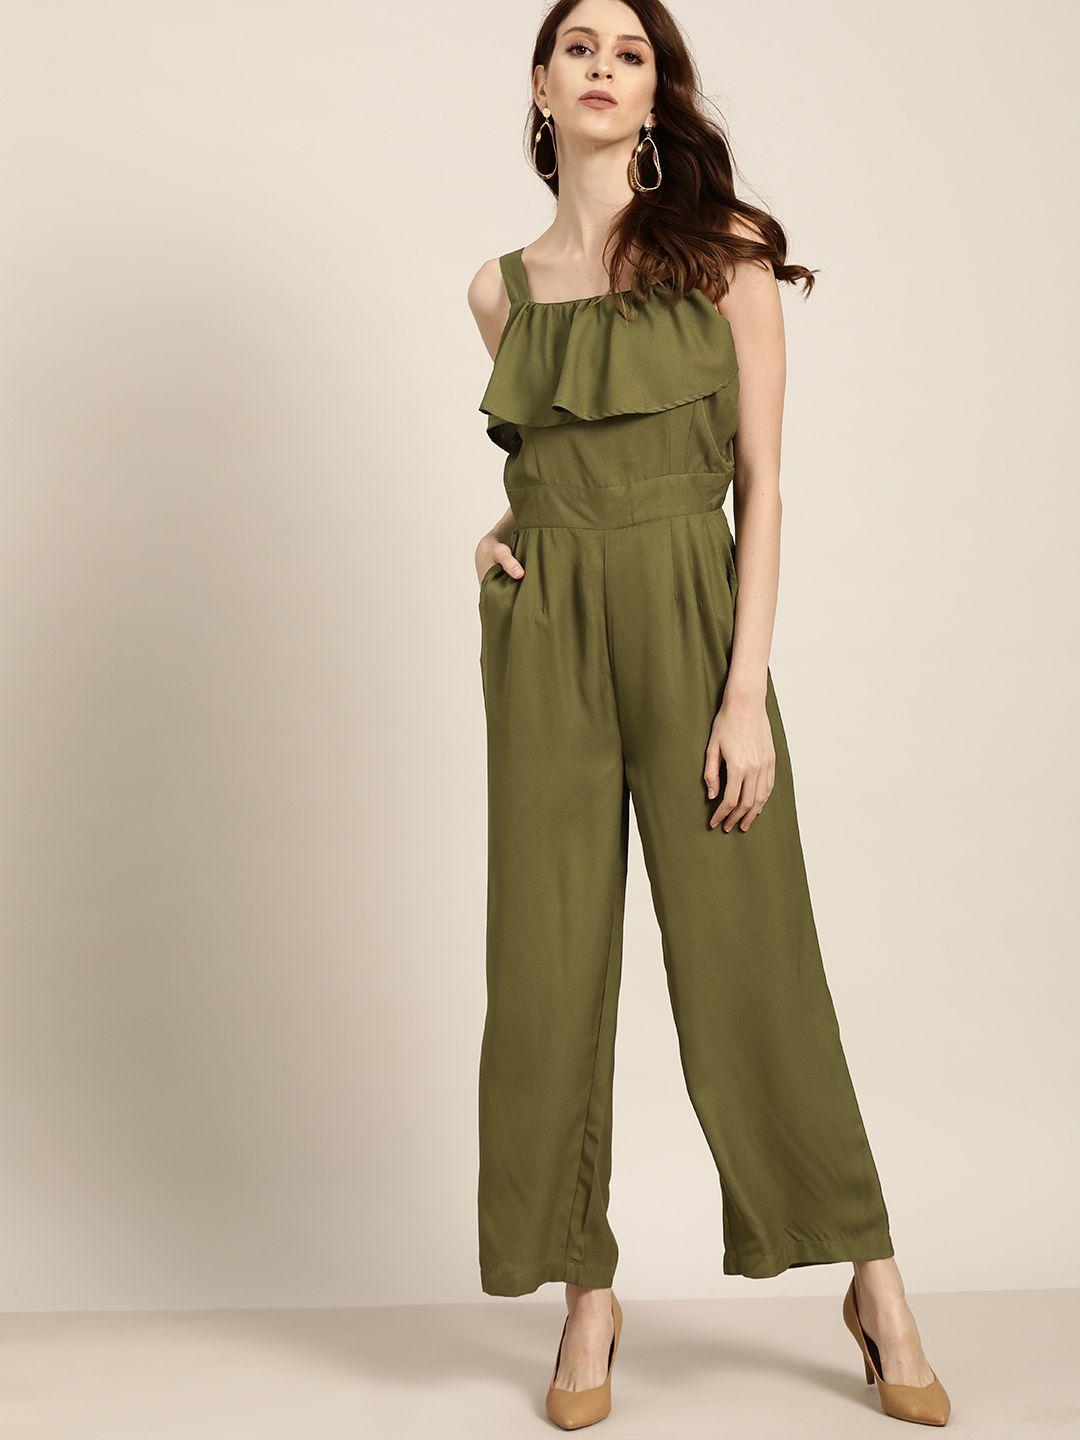 all about you olive green solid basic jumpsuit